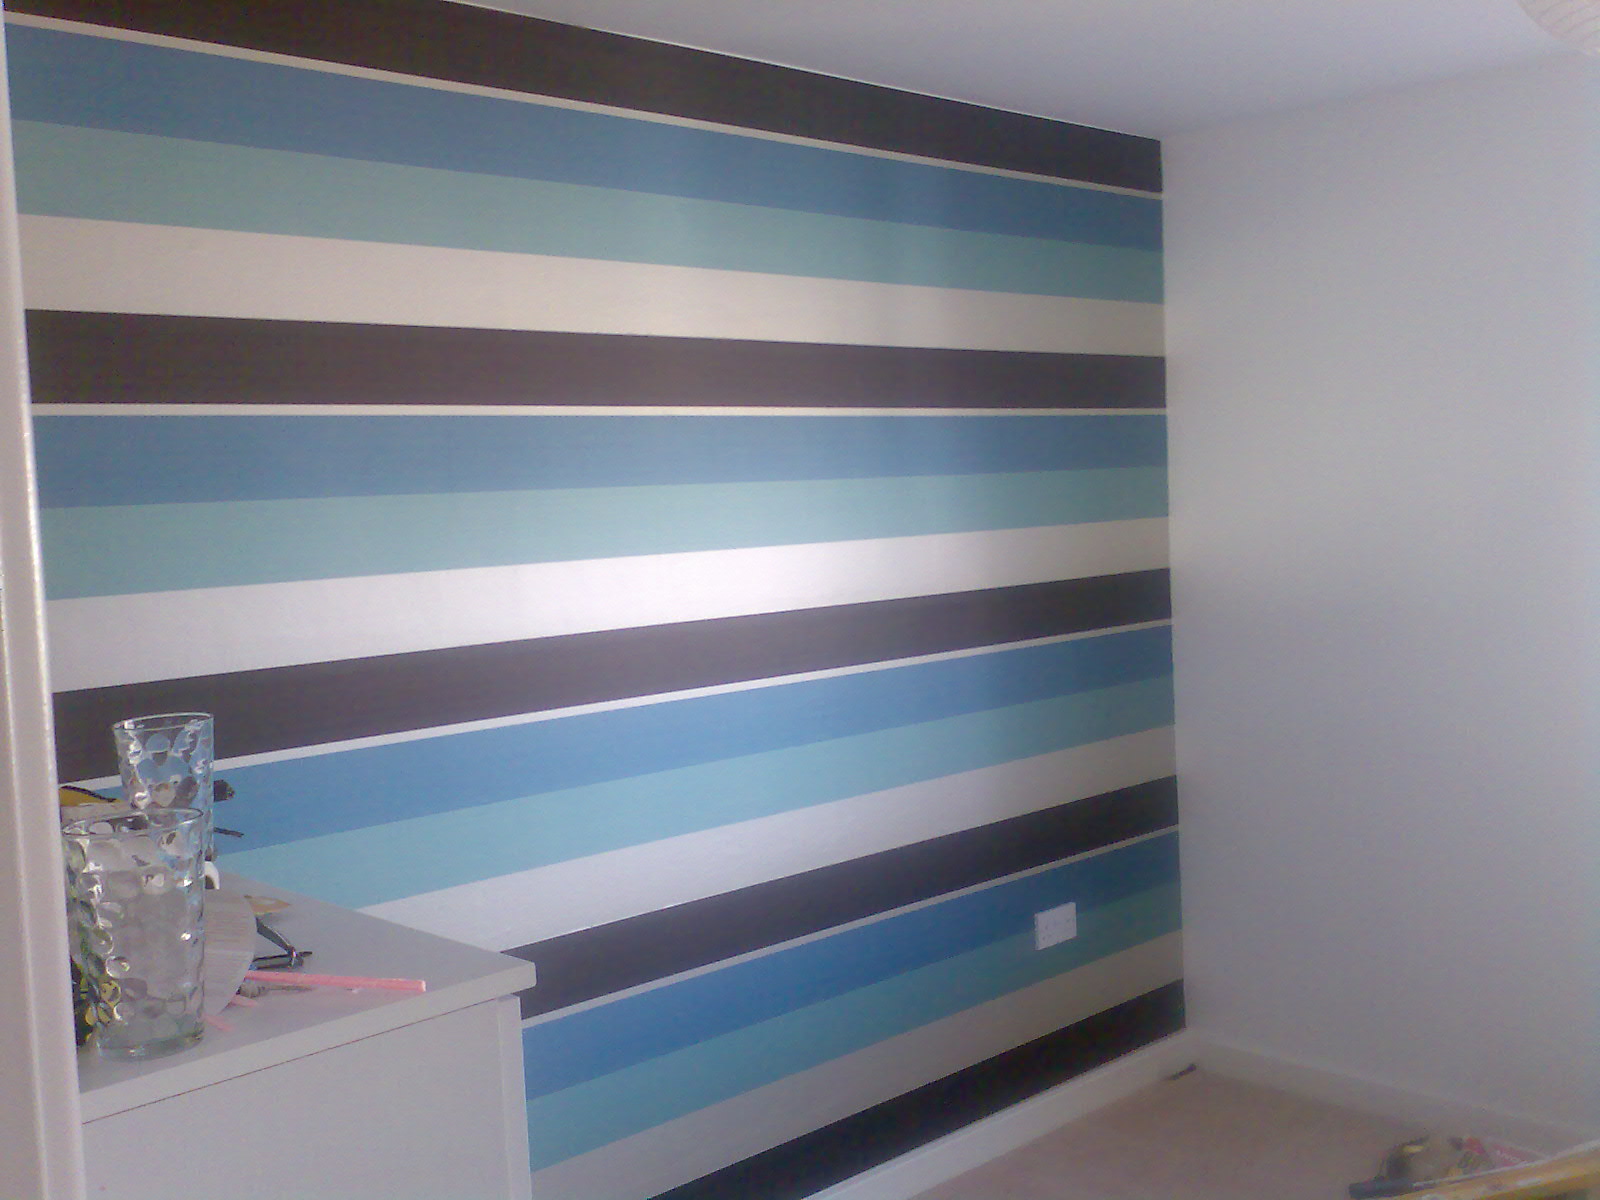 Exclusive Horizontal Wallpaper In A Bedroom In Northampton - Grey And Blue Striped Wall - HD Wallpaper 